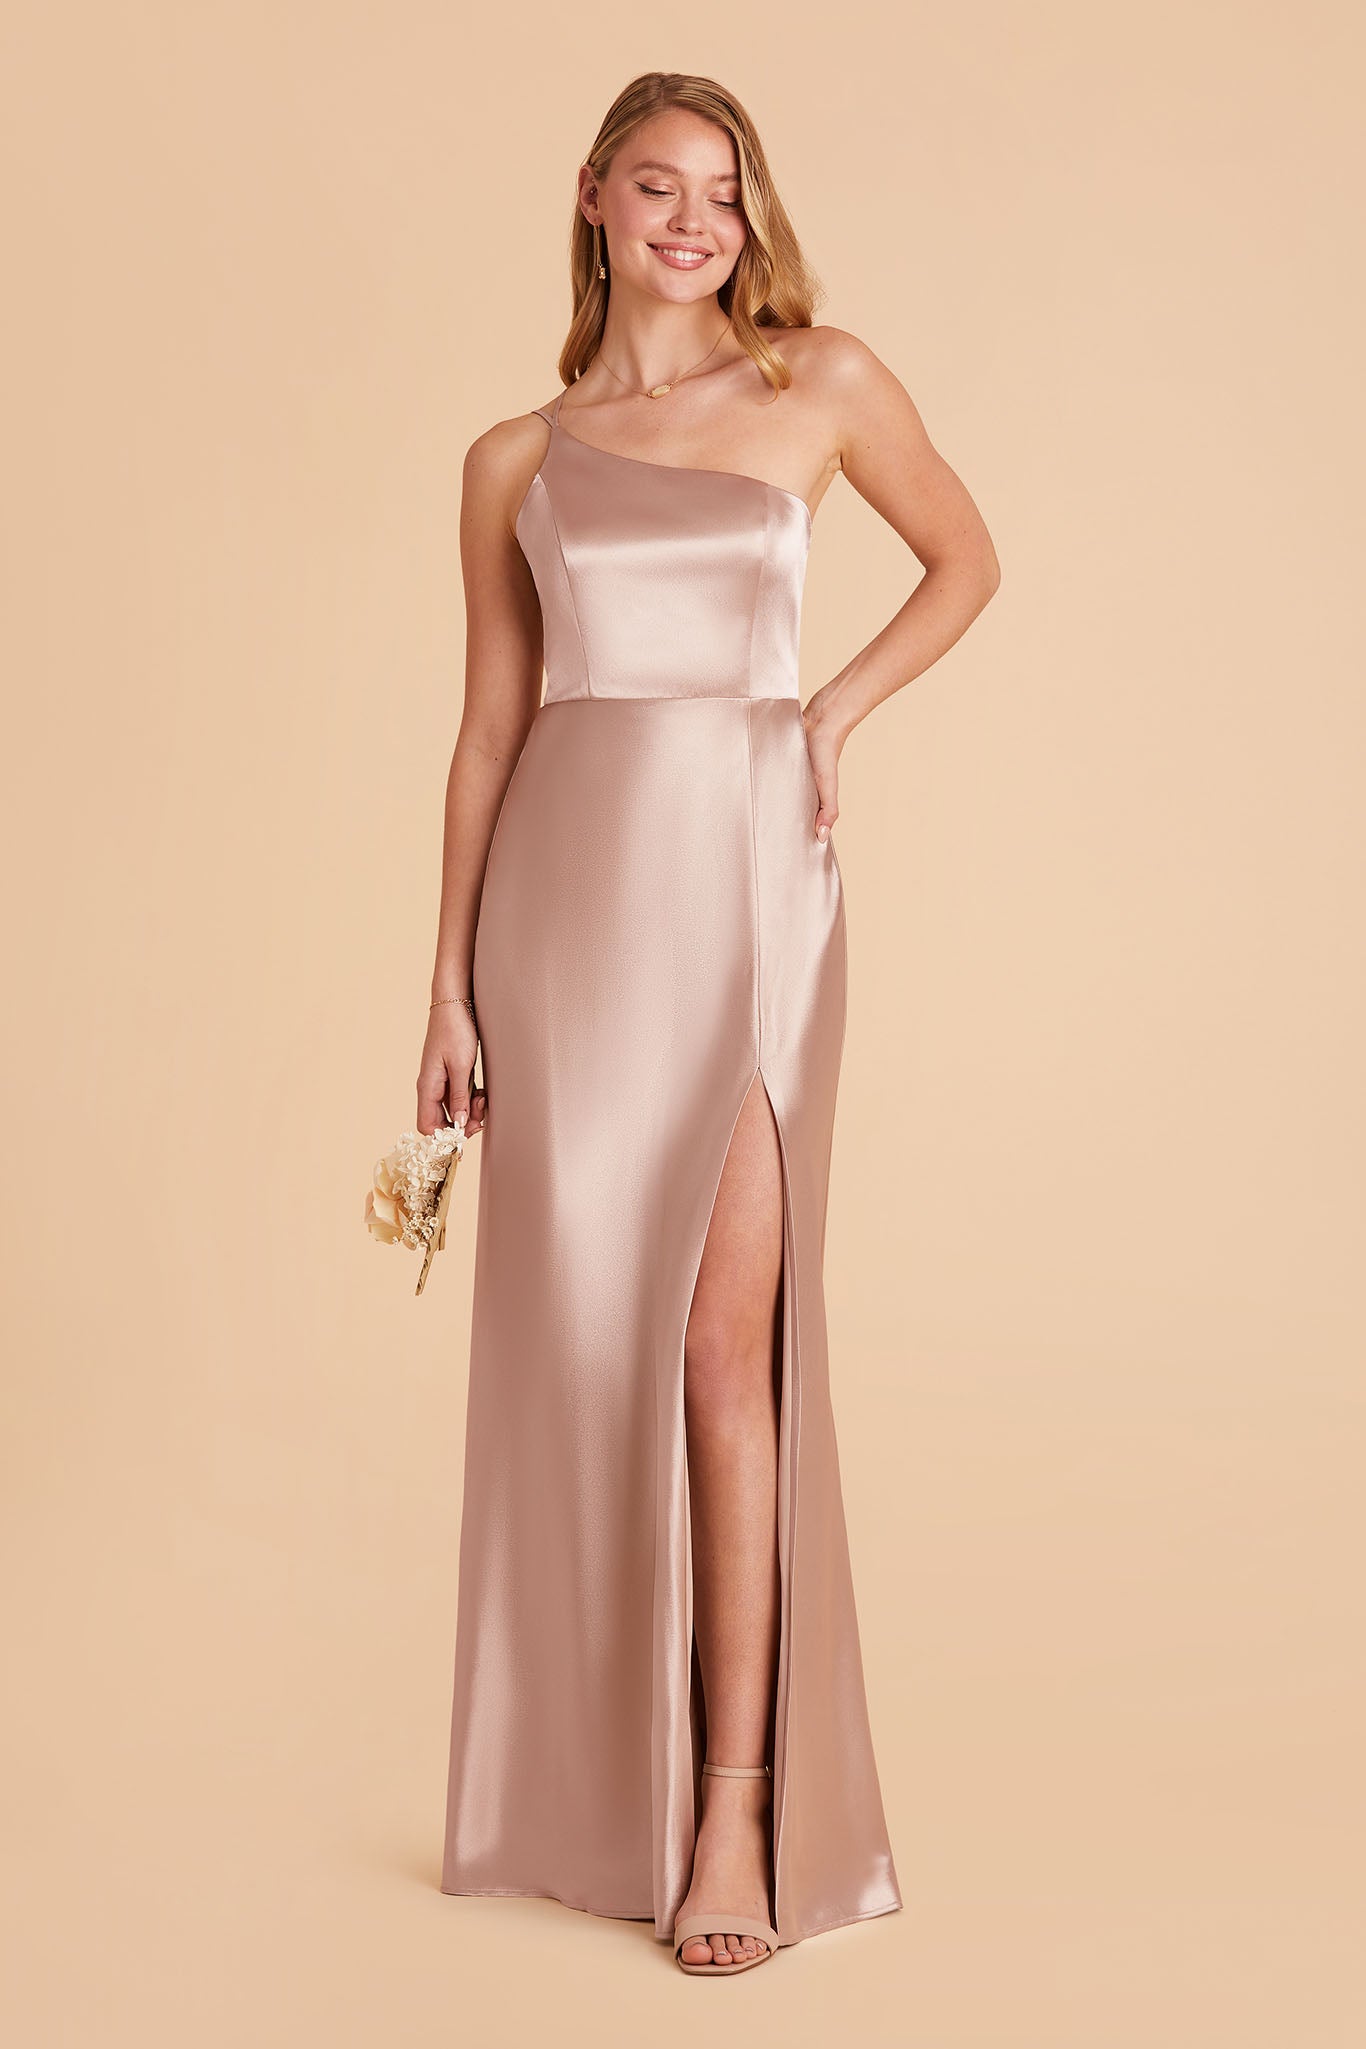 long taupe satin one-shoulder neckline with modern thin straps bridesmaid dress